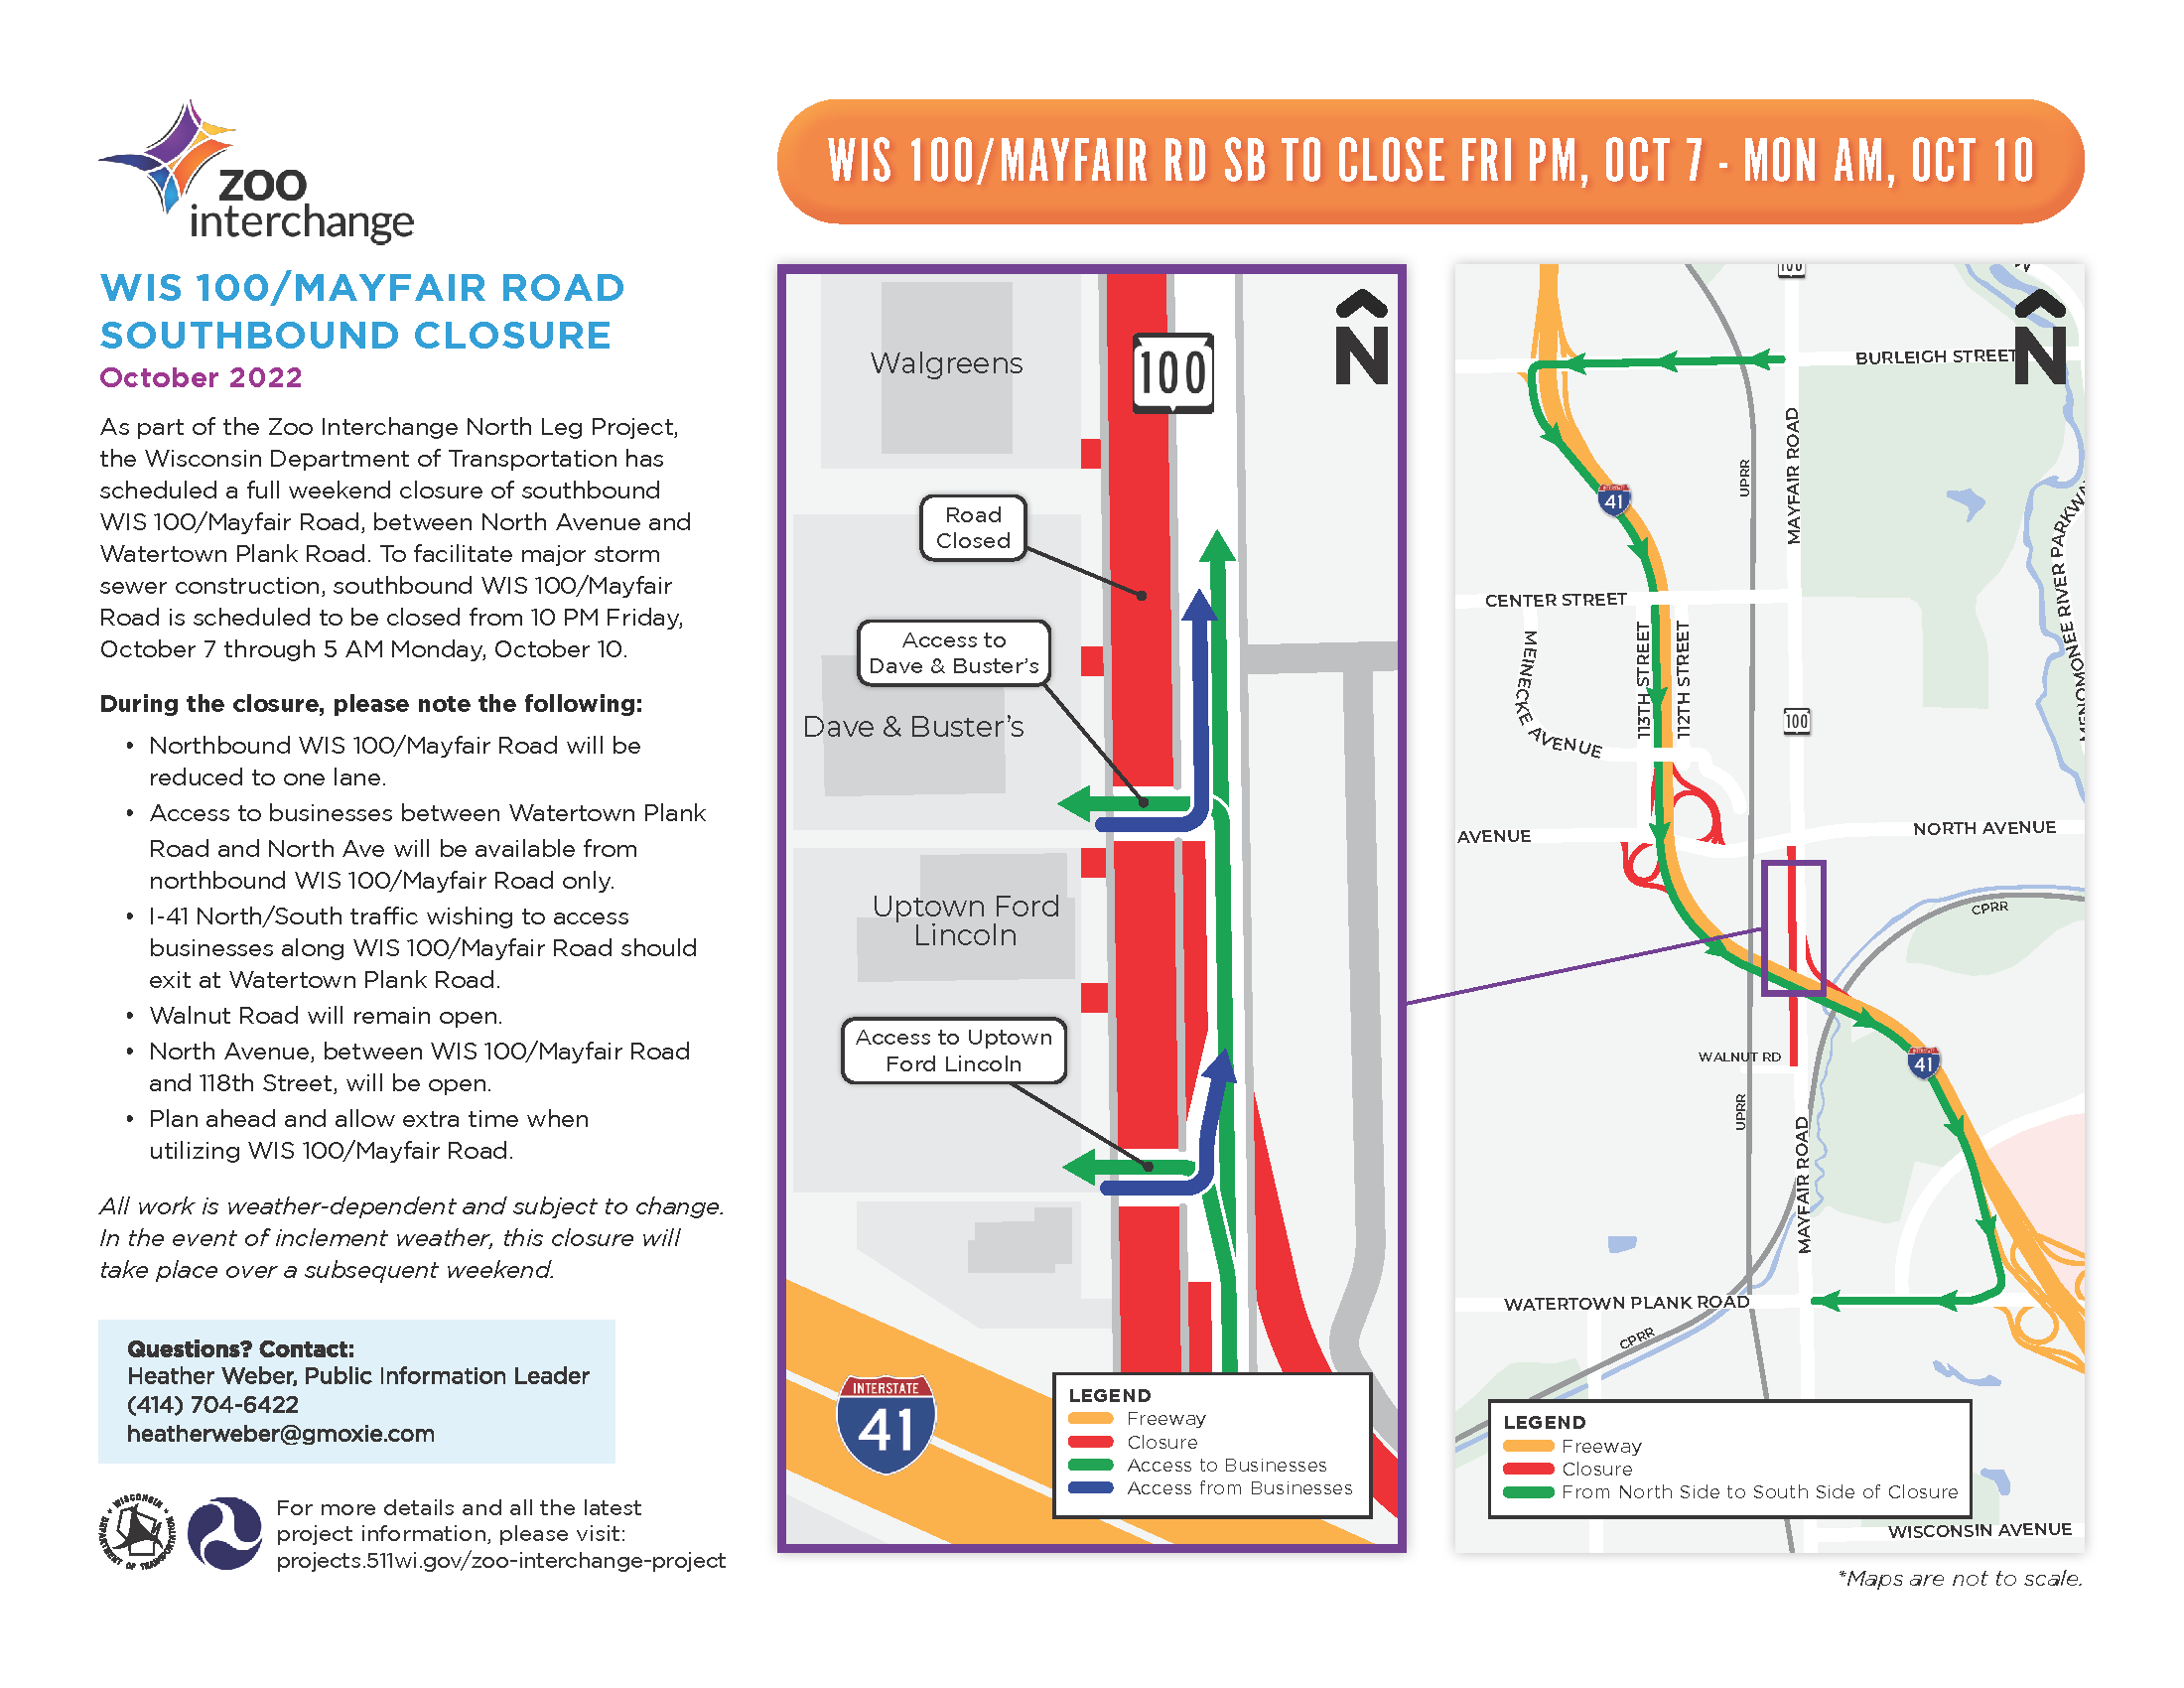 October 7 – Mayfair Rd Southbound Closure